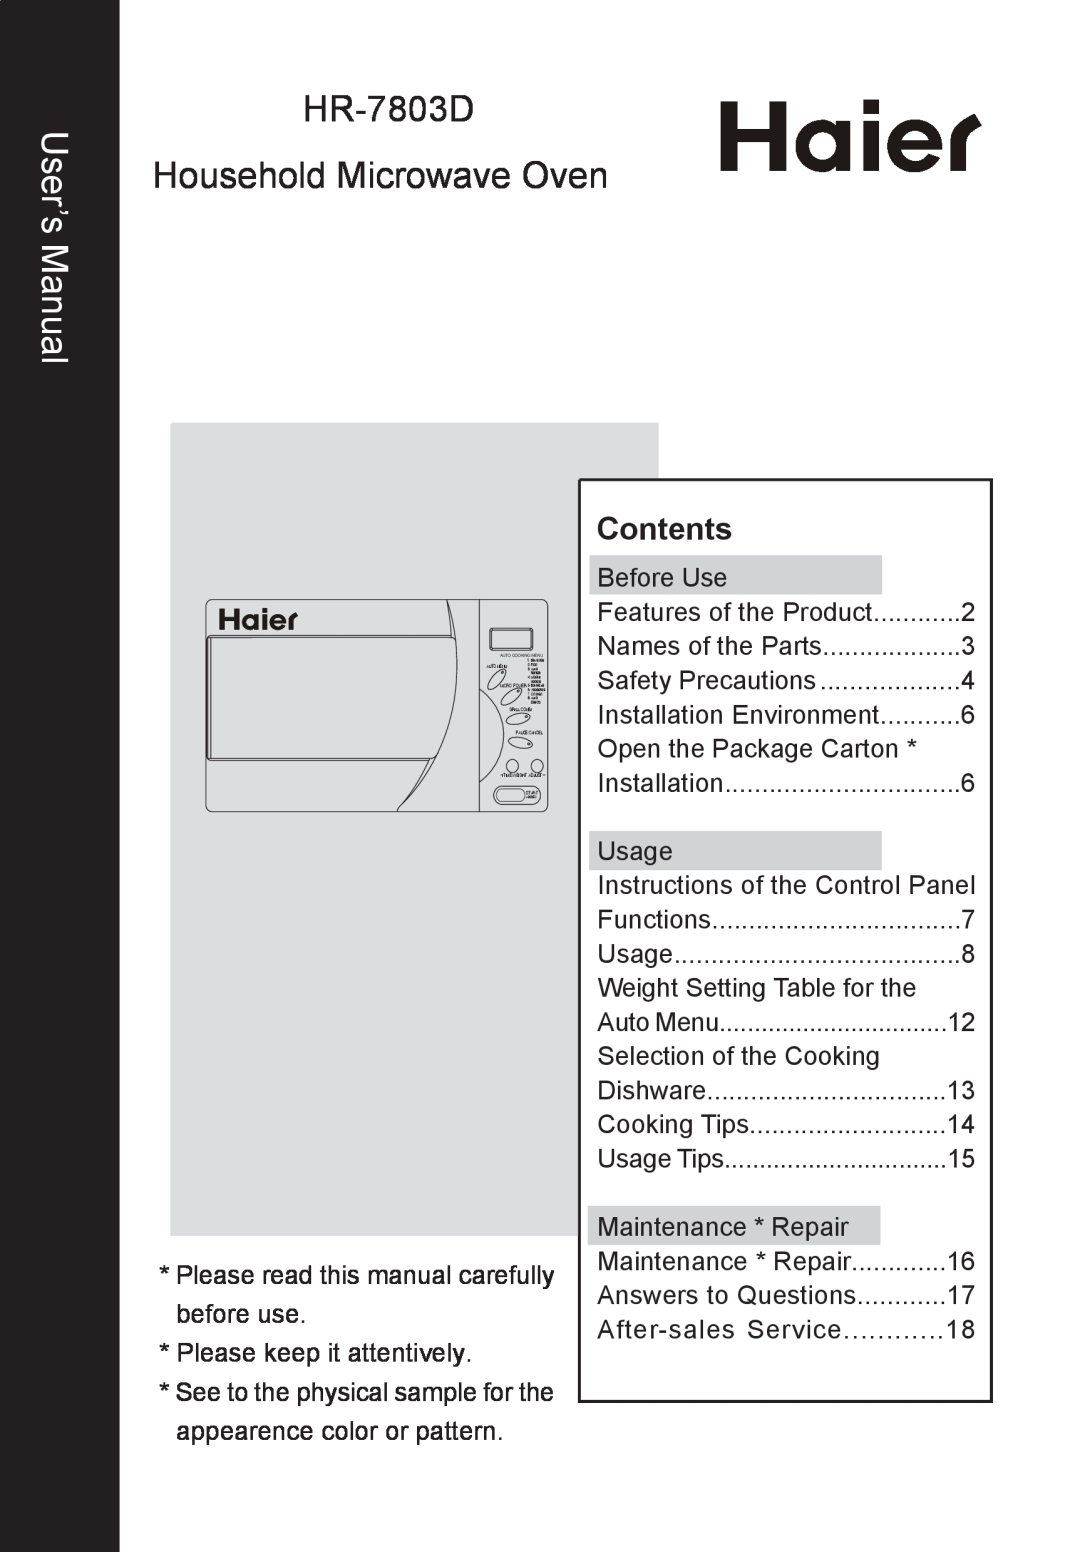 Haier user manual User’s Manual, Contents, HR-7803D Household Microwave Oven 